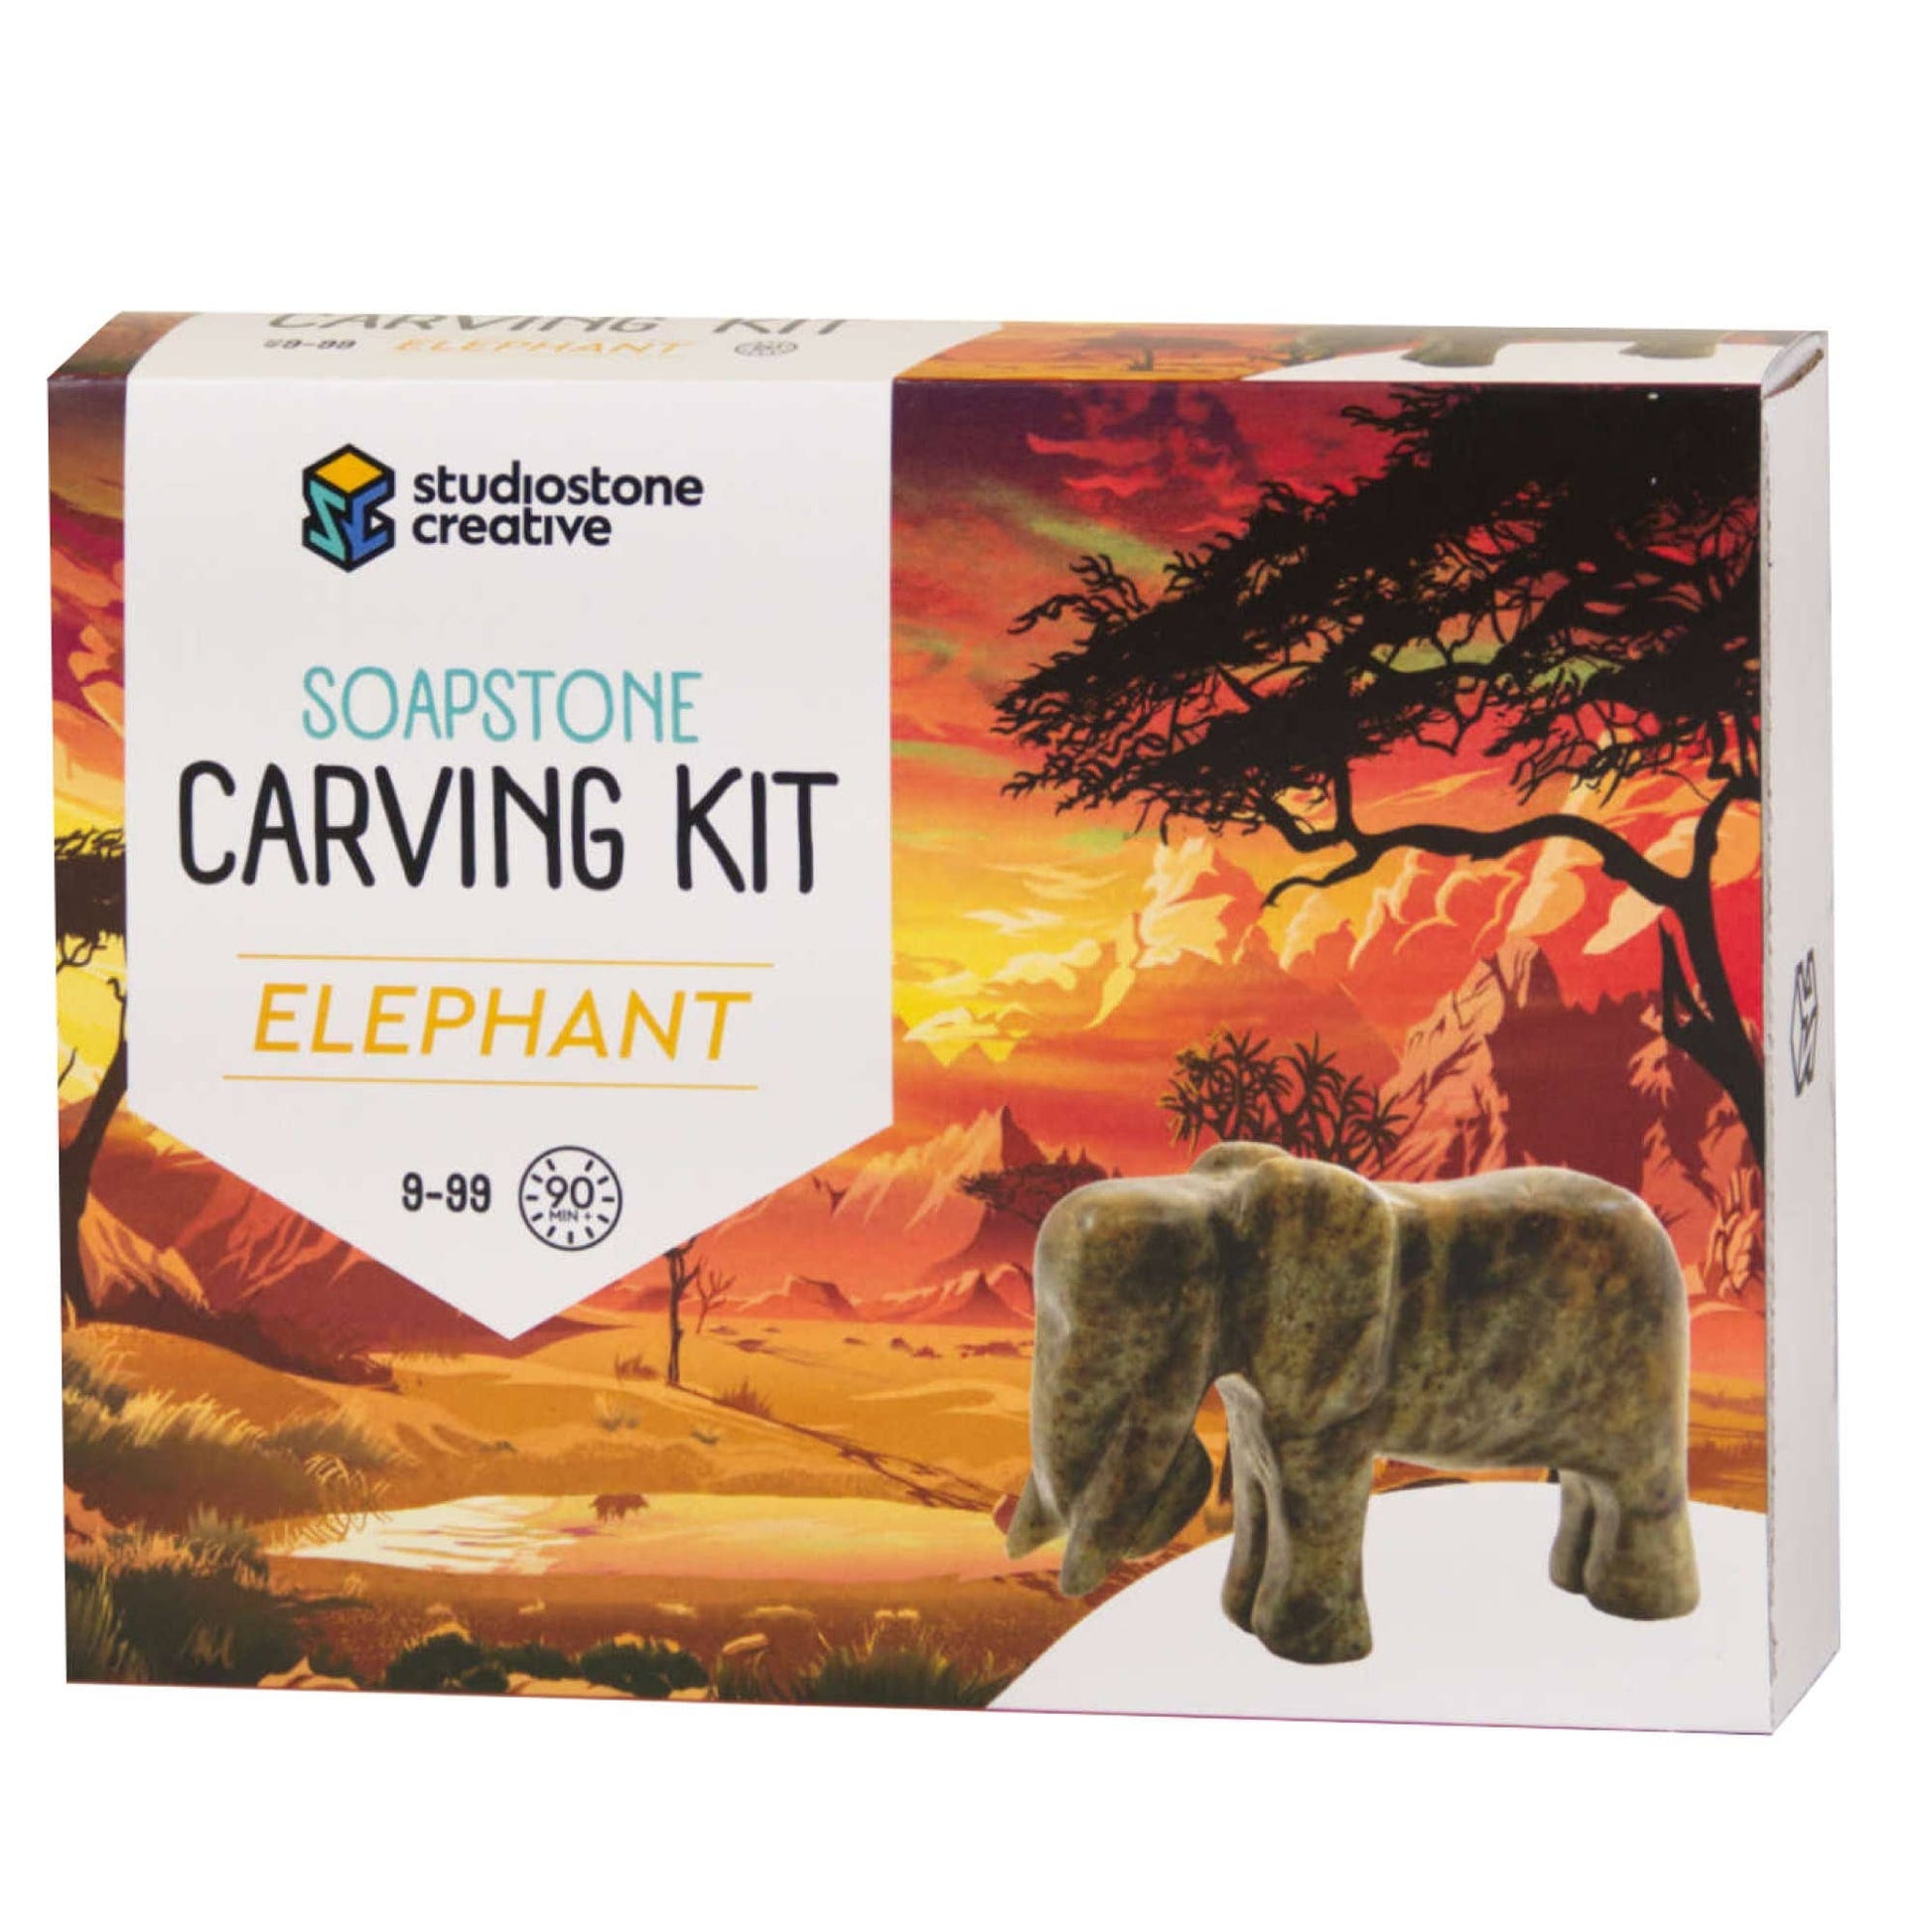 Elephant Soapstone Carving & Whittling—DIY Arts and Craft Kit. All Kid-Safe Tools, Materials Included. For kids and adults 8 to 99+ Years. - Einstein's Attic